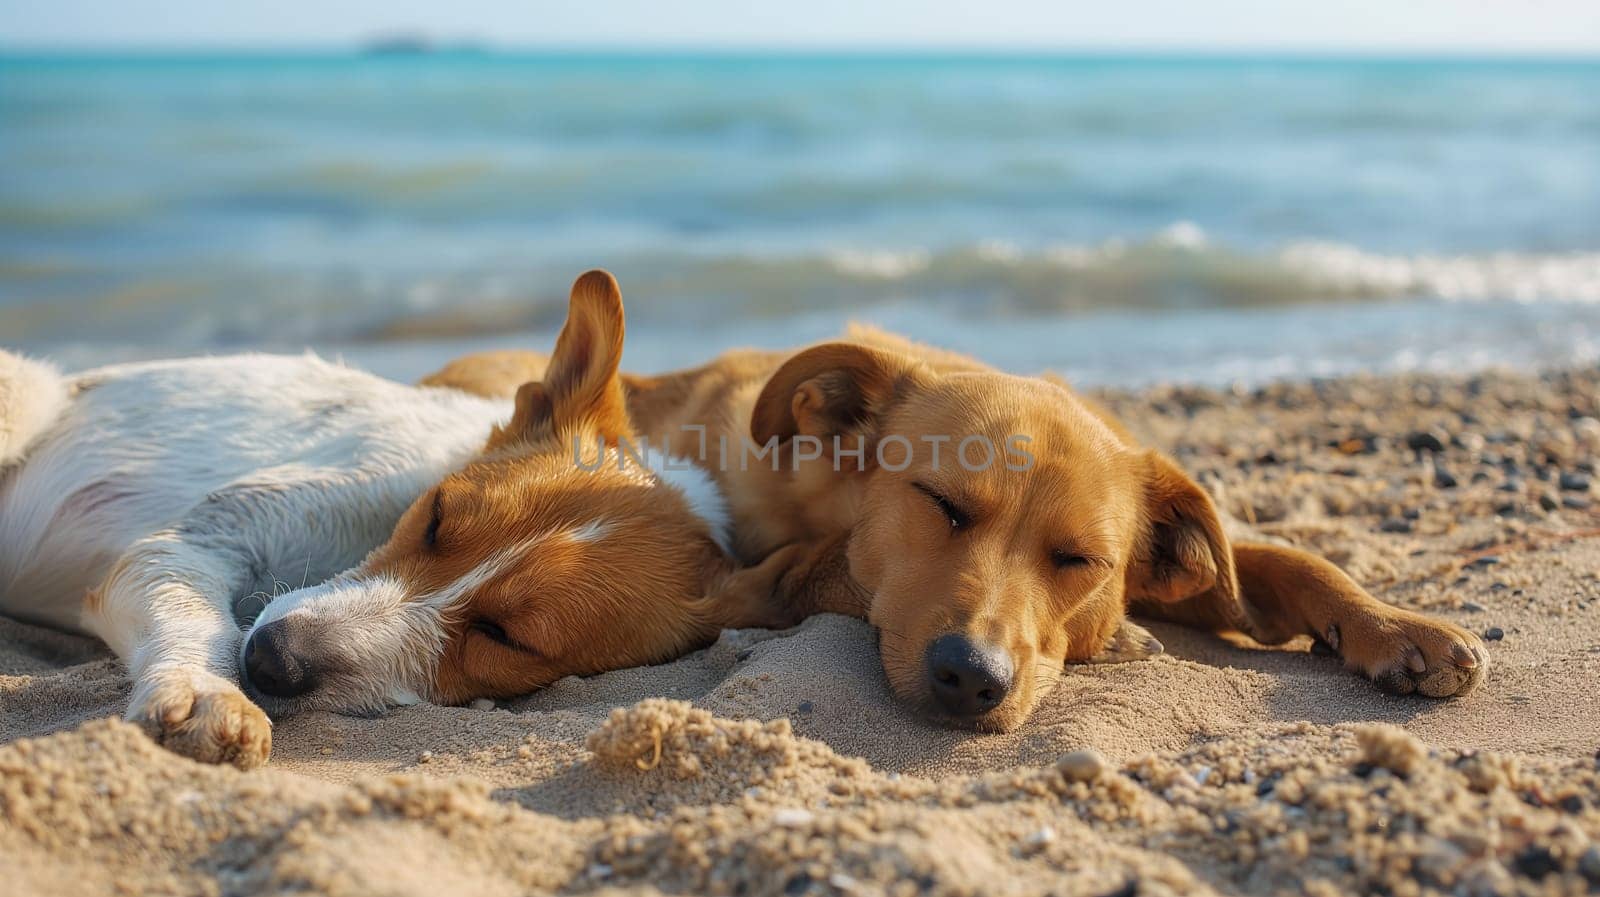 Serene Beachside Nap With Two Peaceful Dogs at Dusk by chrisroll